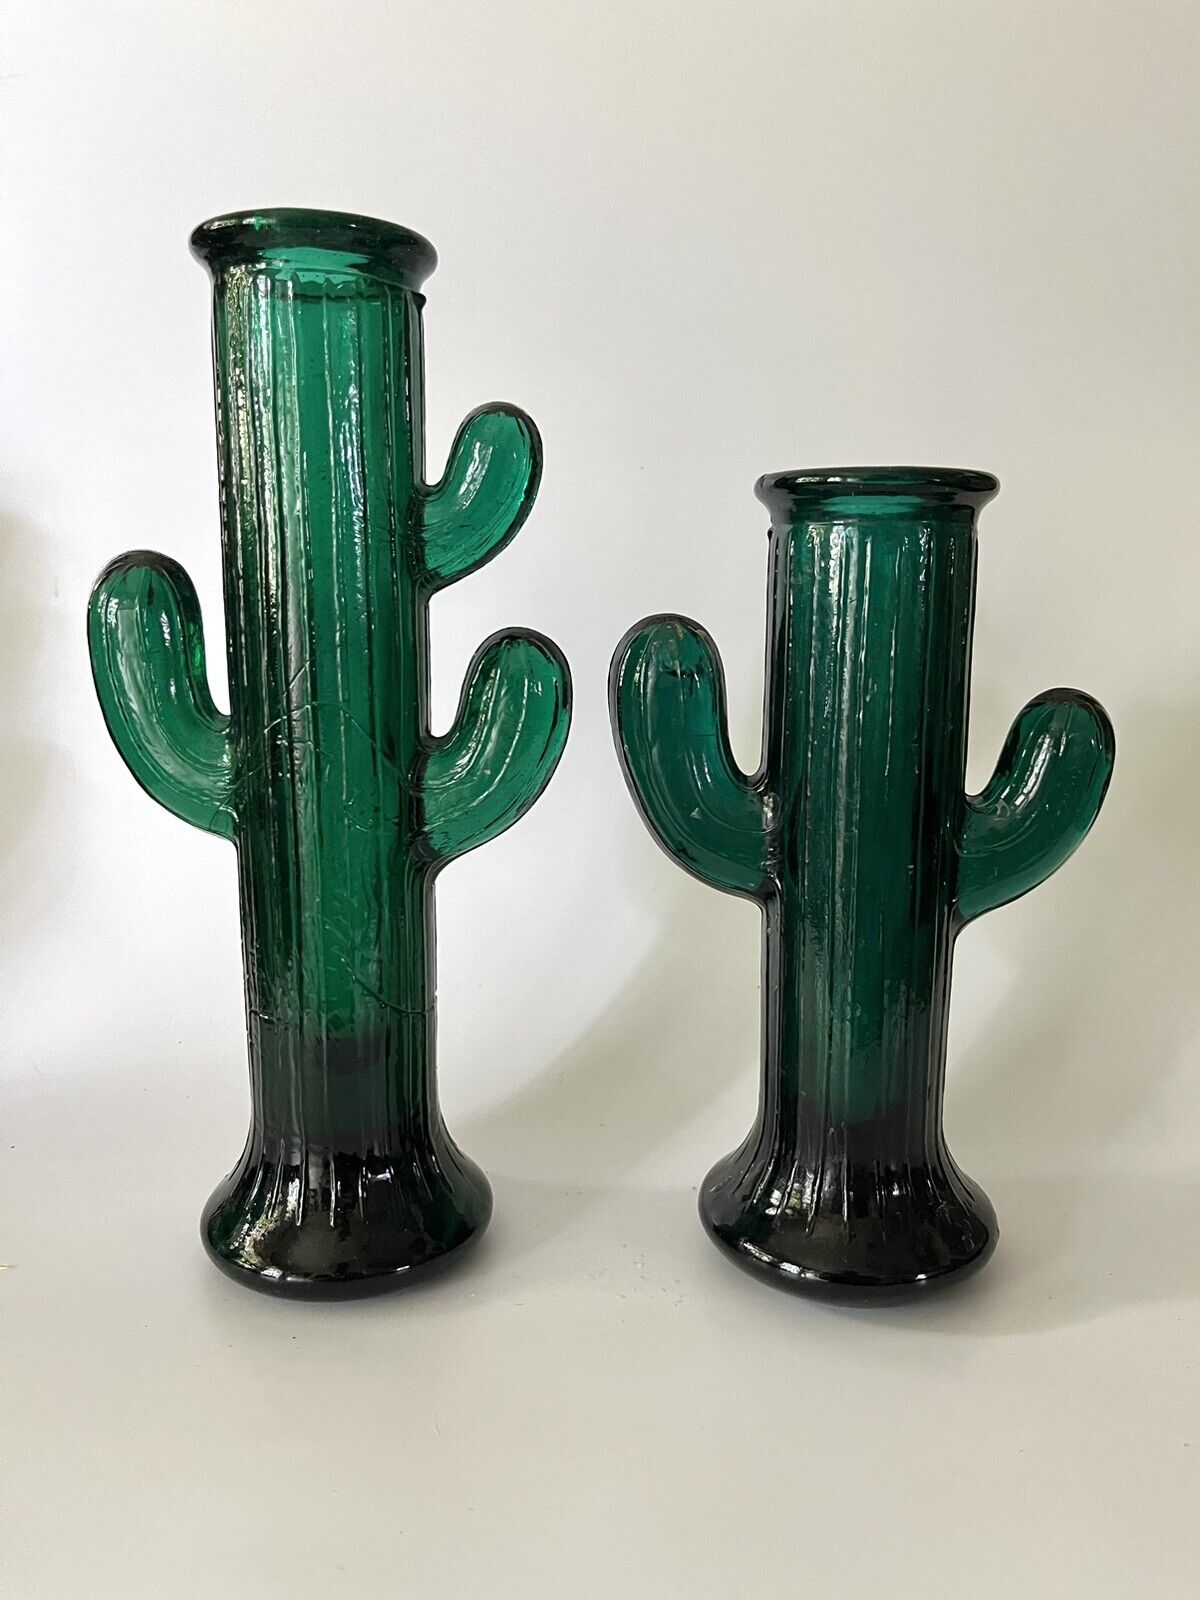 Pair of Green Glass Cactus Candle Holders Vases Western Southwestern Decor